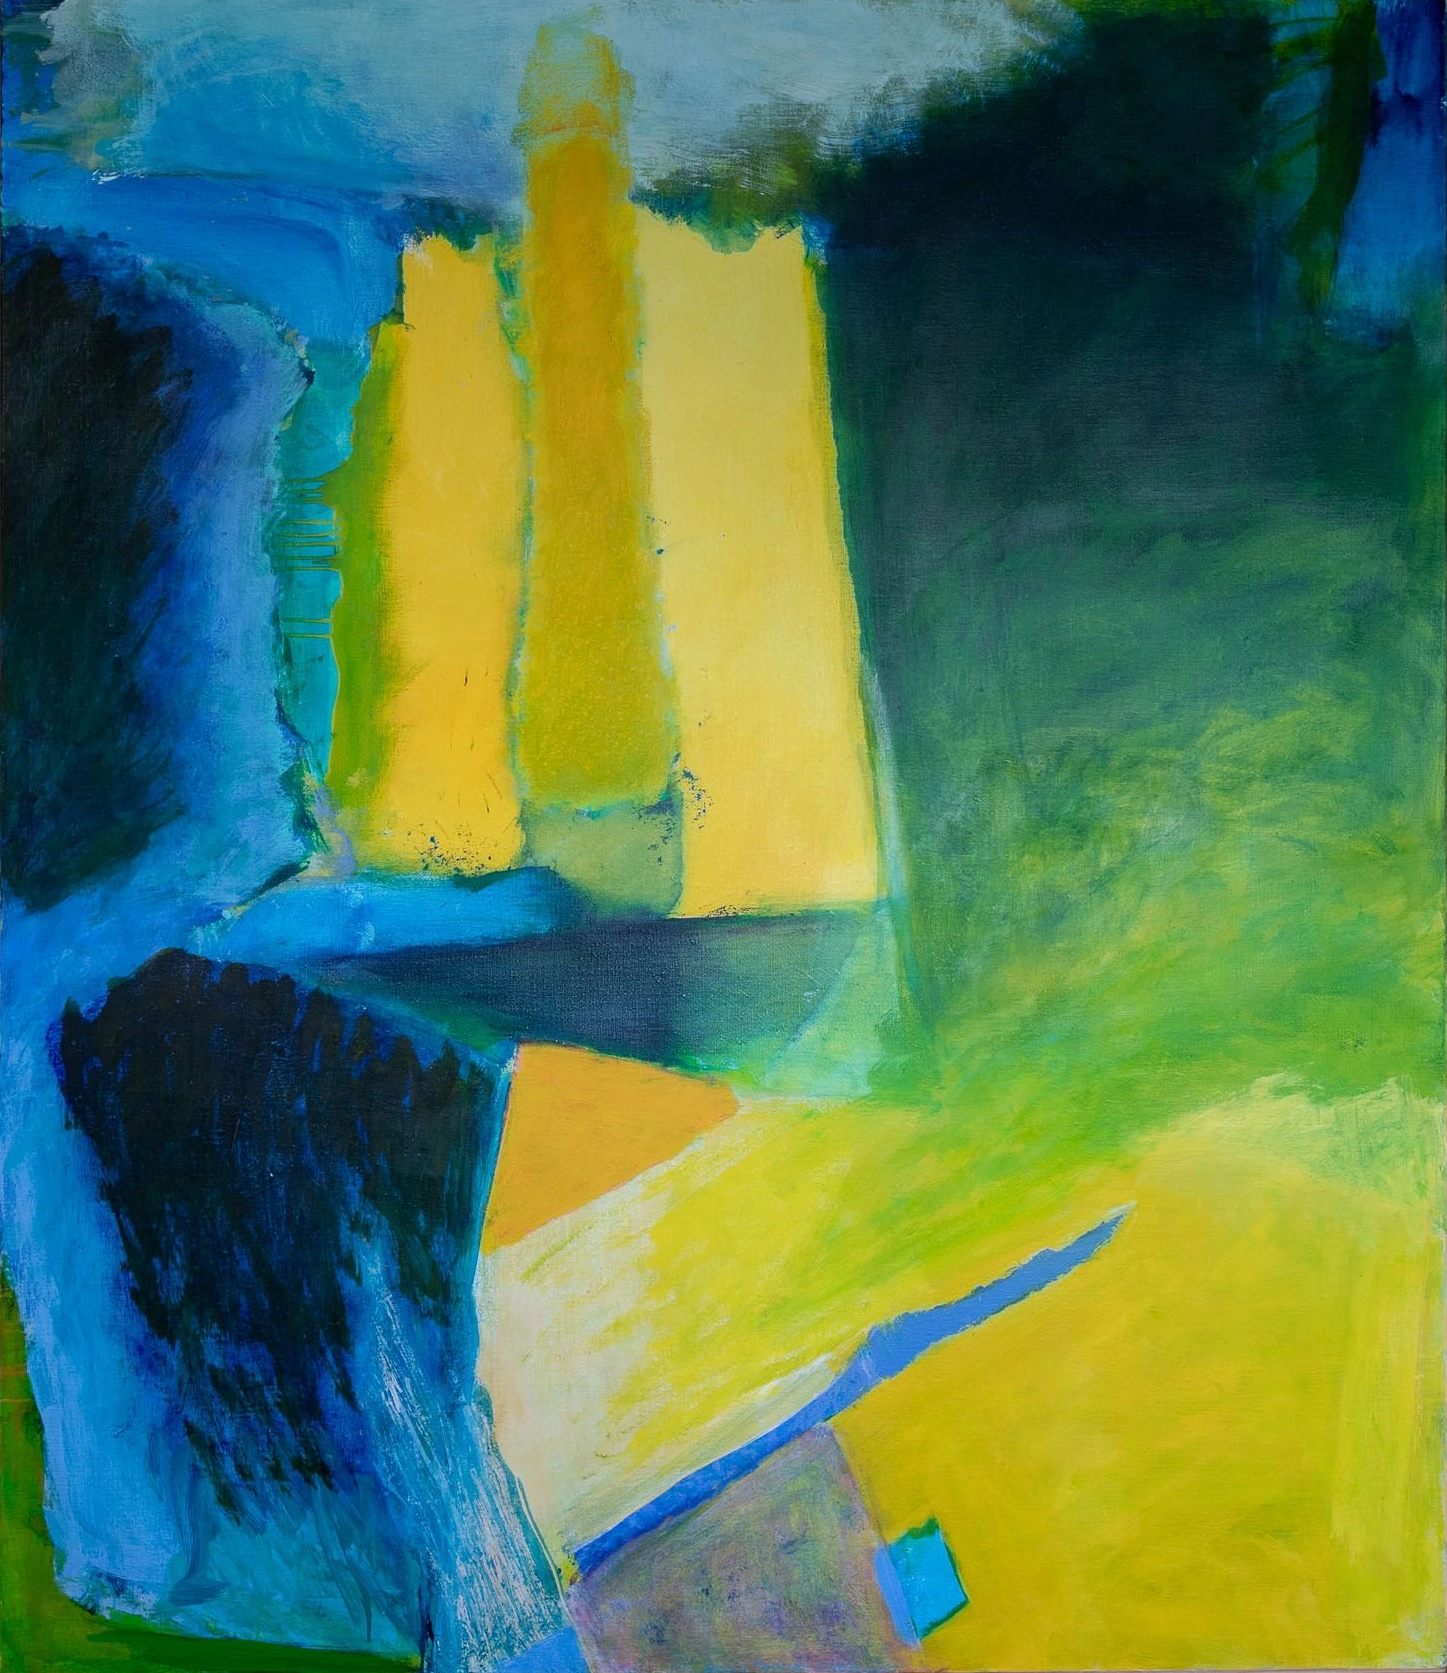 Abstract oil painting with tones of blue on the left, with greens and yellows on the right. Three yellow rectangular shapes are in the center of the composition.